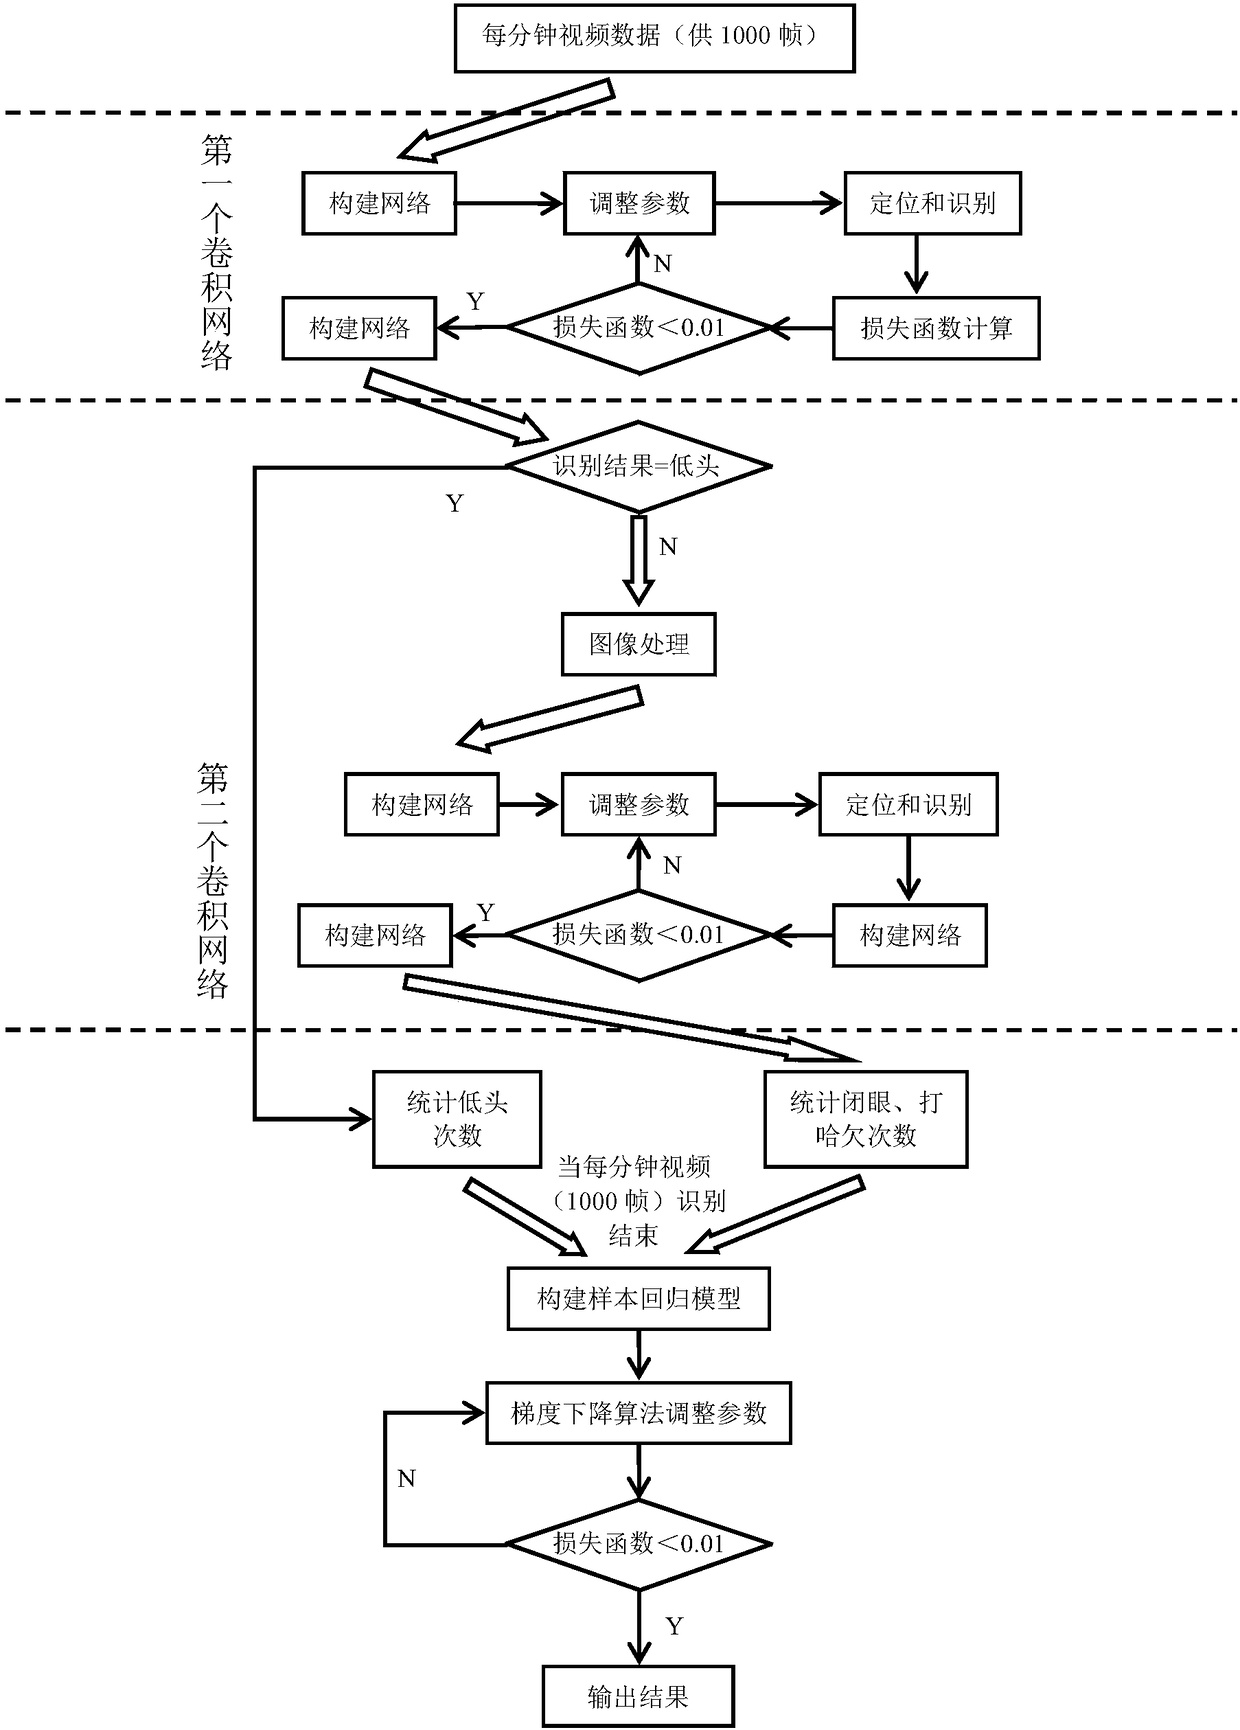 Driving fatigue degree detection regression model based on dual network result